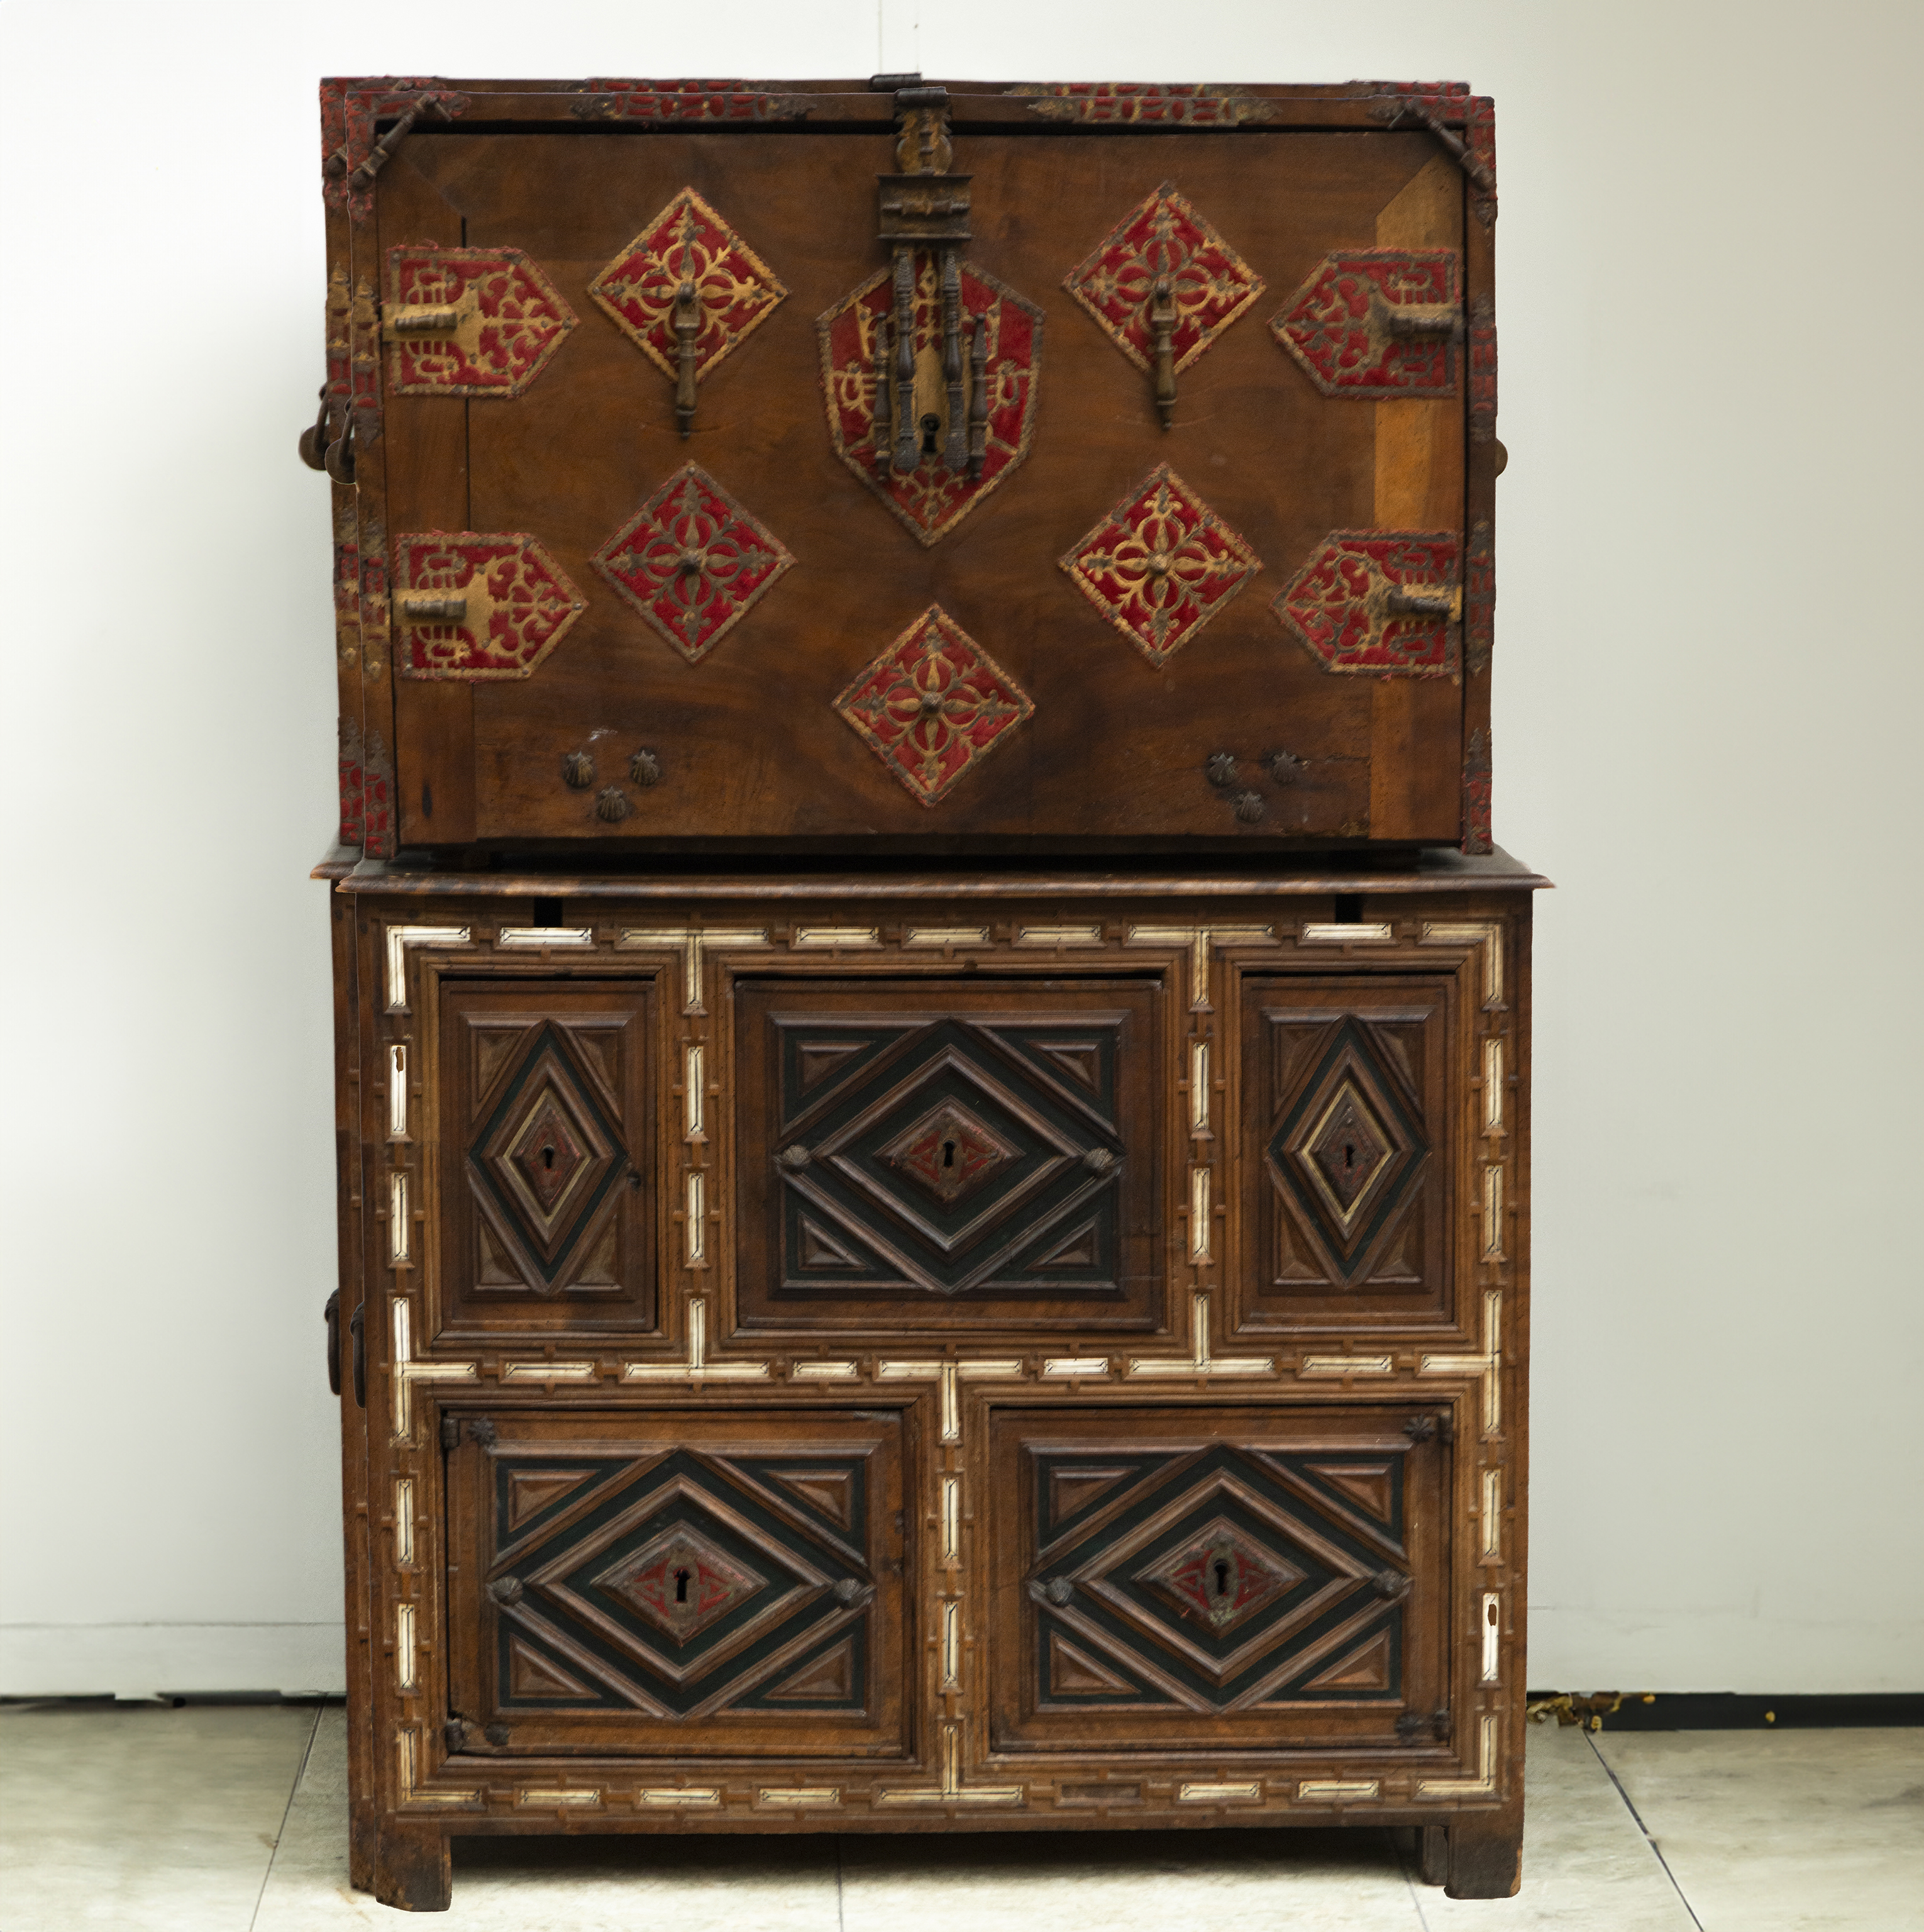 Renaissance Vargas "Bargueño" type chest cabinet with period table, 16th century